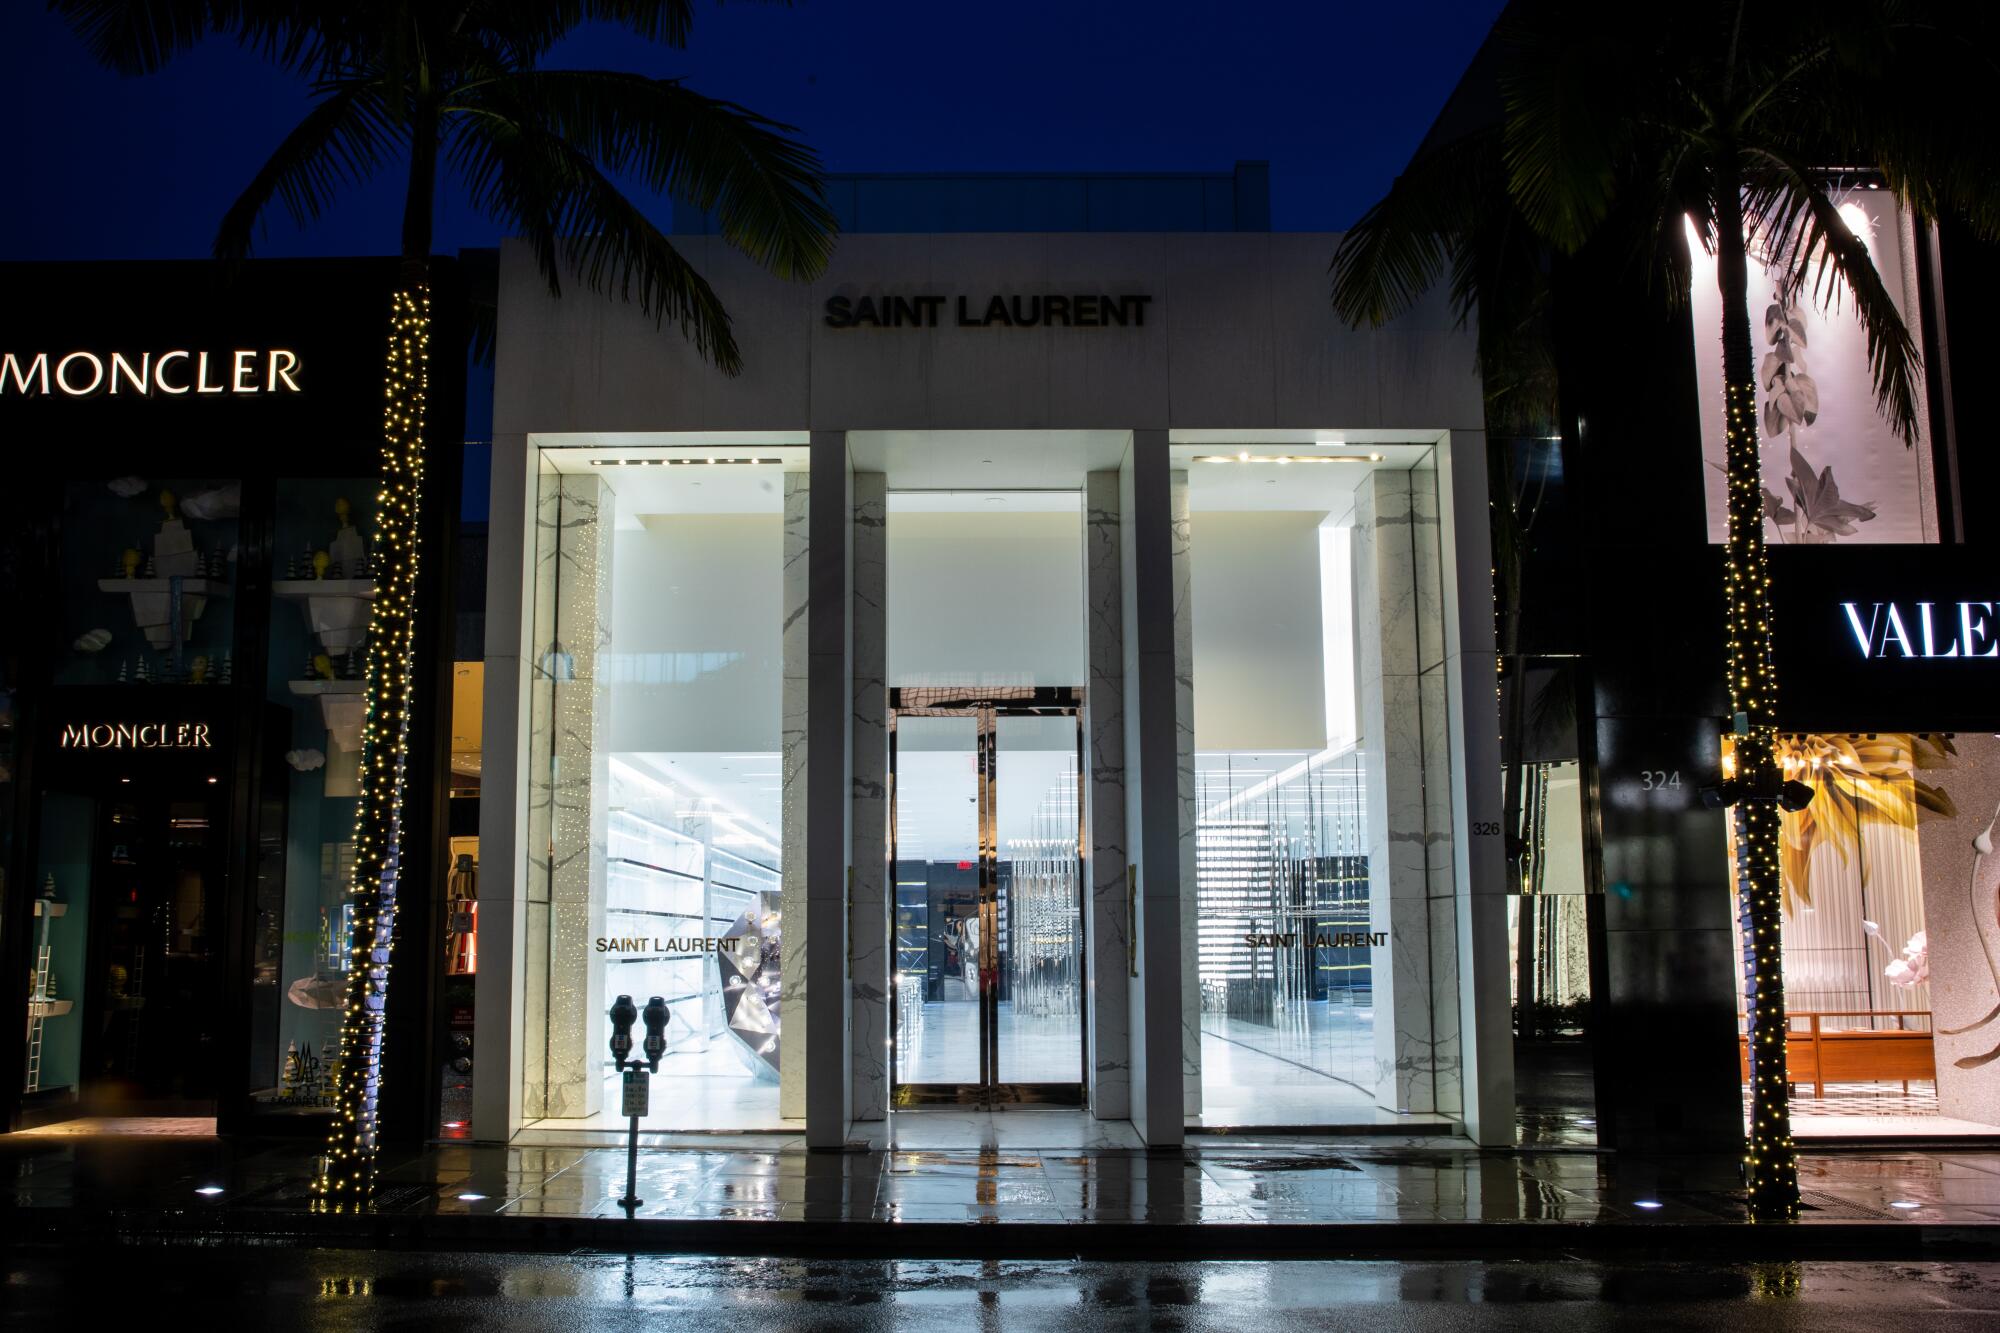 Saint Laurent has cleared out their stores after Gov. Gavin Newsom's 'Stay at Home' order